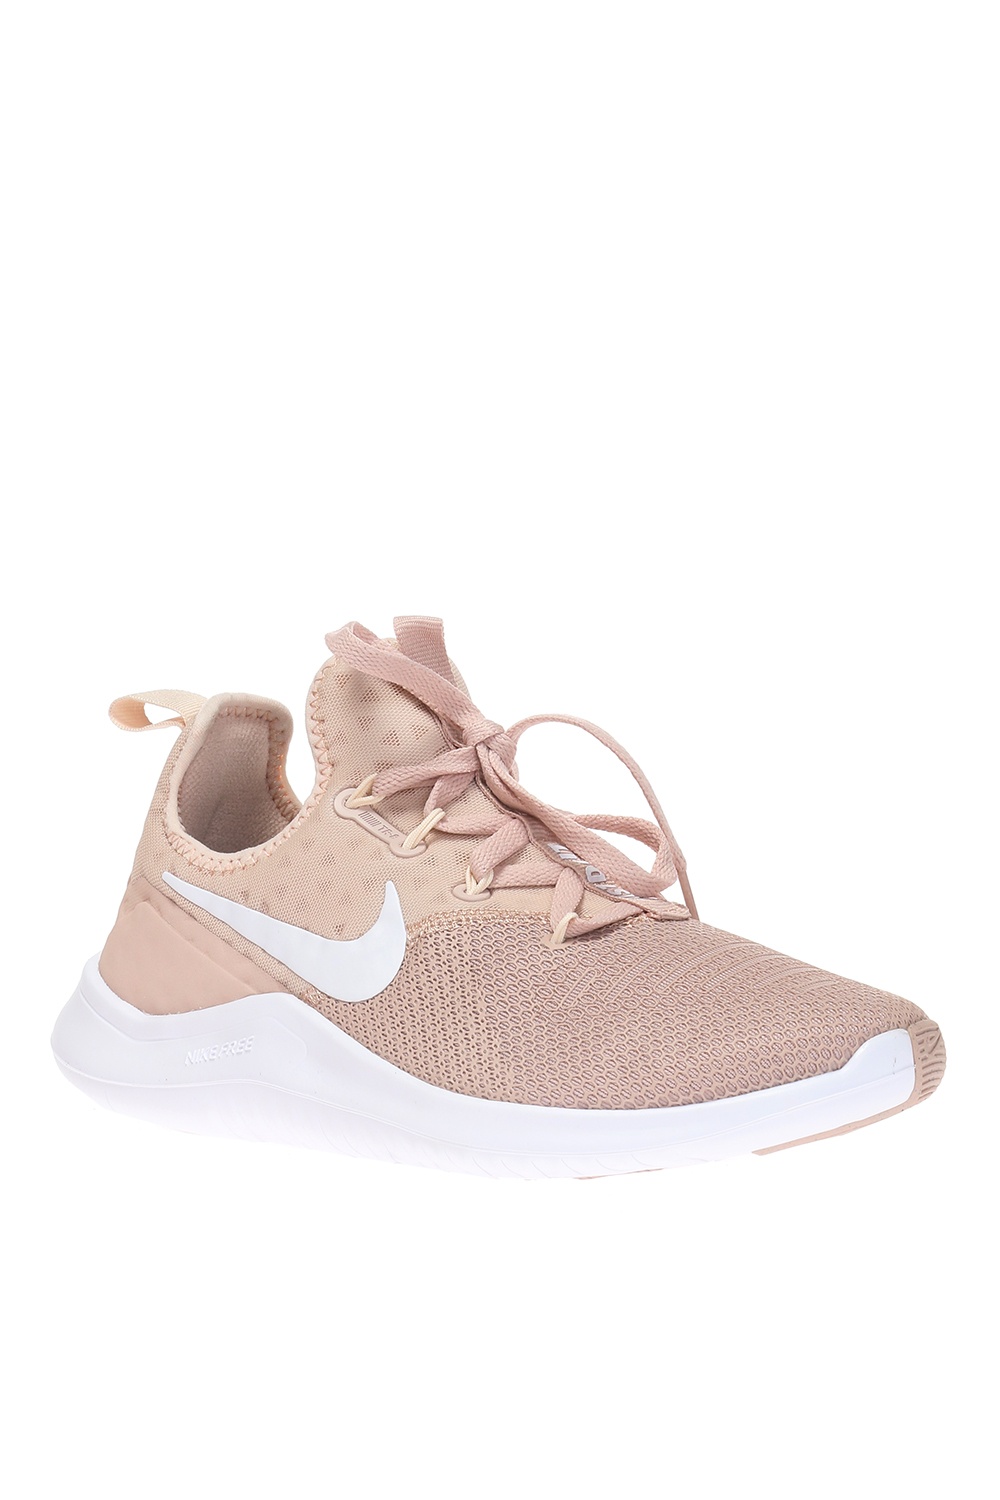 nike free tr8 particle beige